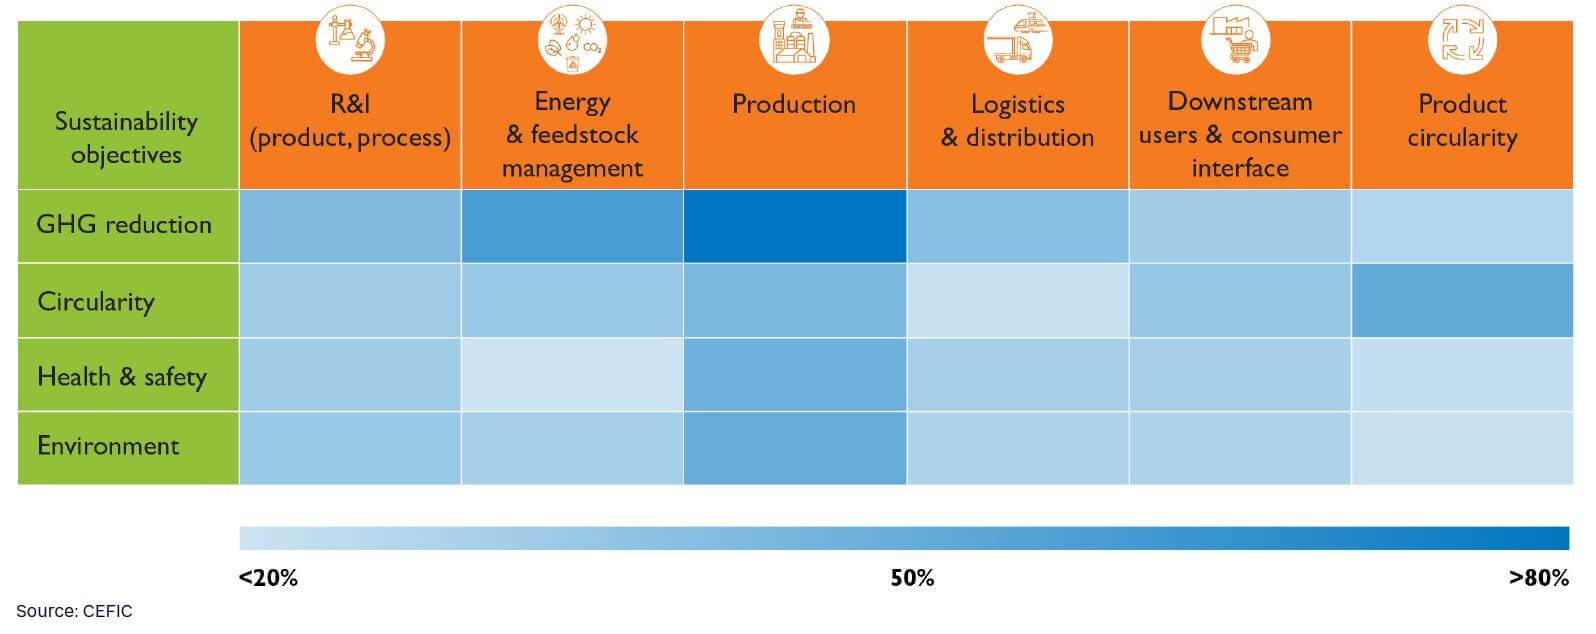 Figure 2. Intensity of chemical companies’ priorities in the value chain for current and future application of digital technologies to meet sustainability objectives